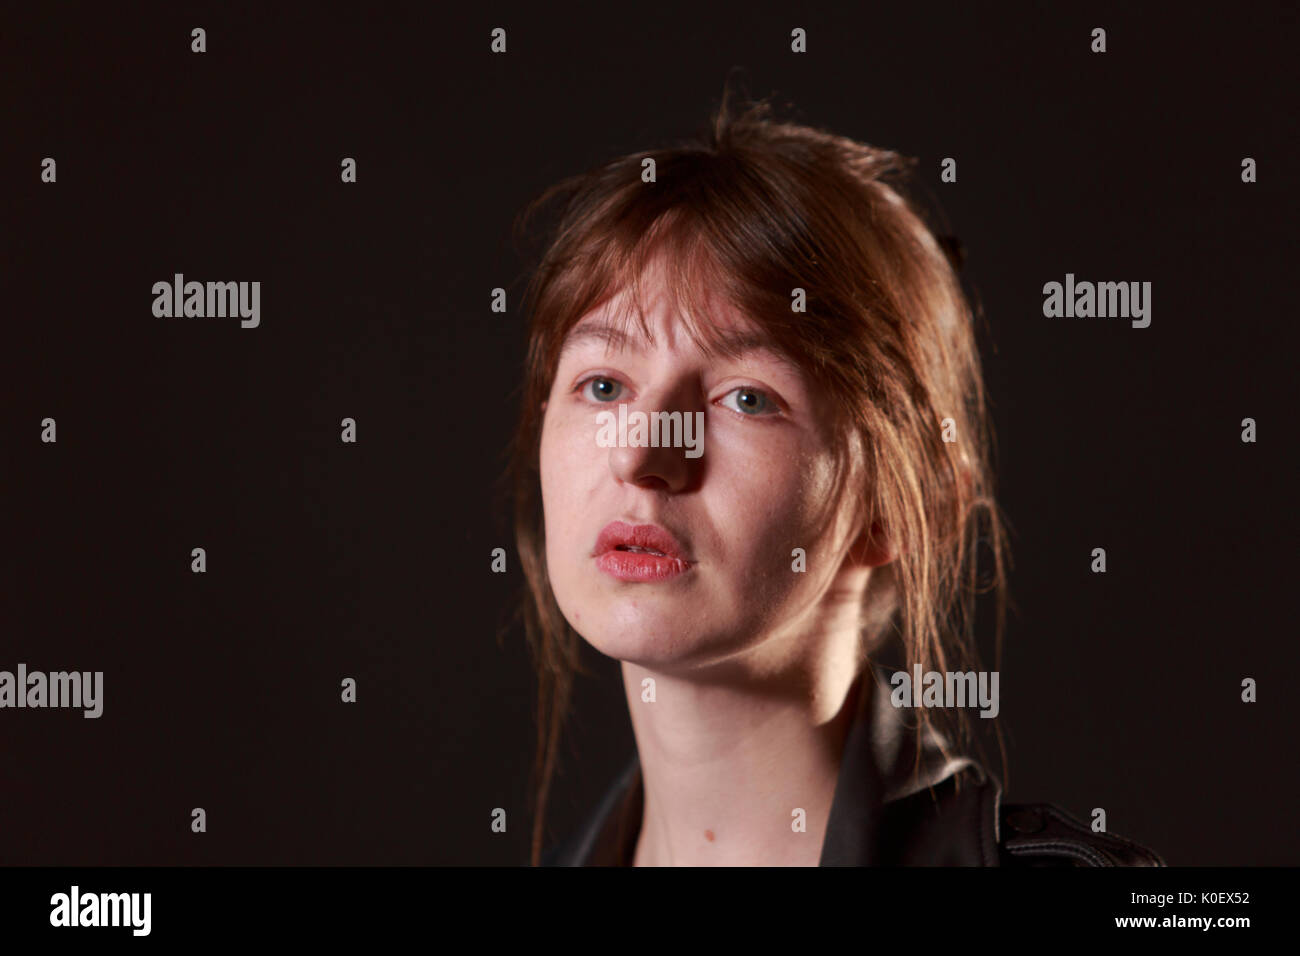 Edinburgh, Scotland 22nd August. Day 11 Edinburgh International Book Festival. Pictured: Sally Rooney, lives in Dublin, where she graduated from Trinity College. Her work has appeared in Granta, The Dublin Review, The White Review, The Stinging Fly, and the Winter Pages anthology. Pako Mera/Alamy Live News. Stock Photo